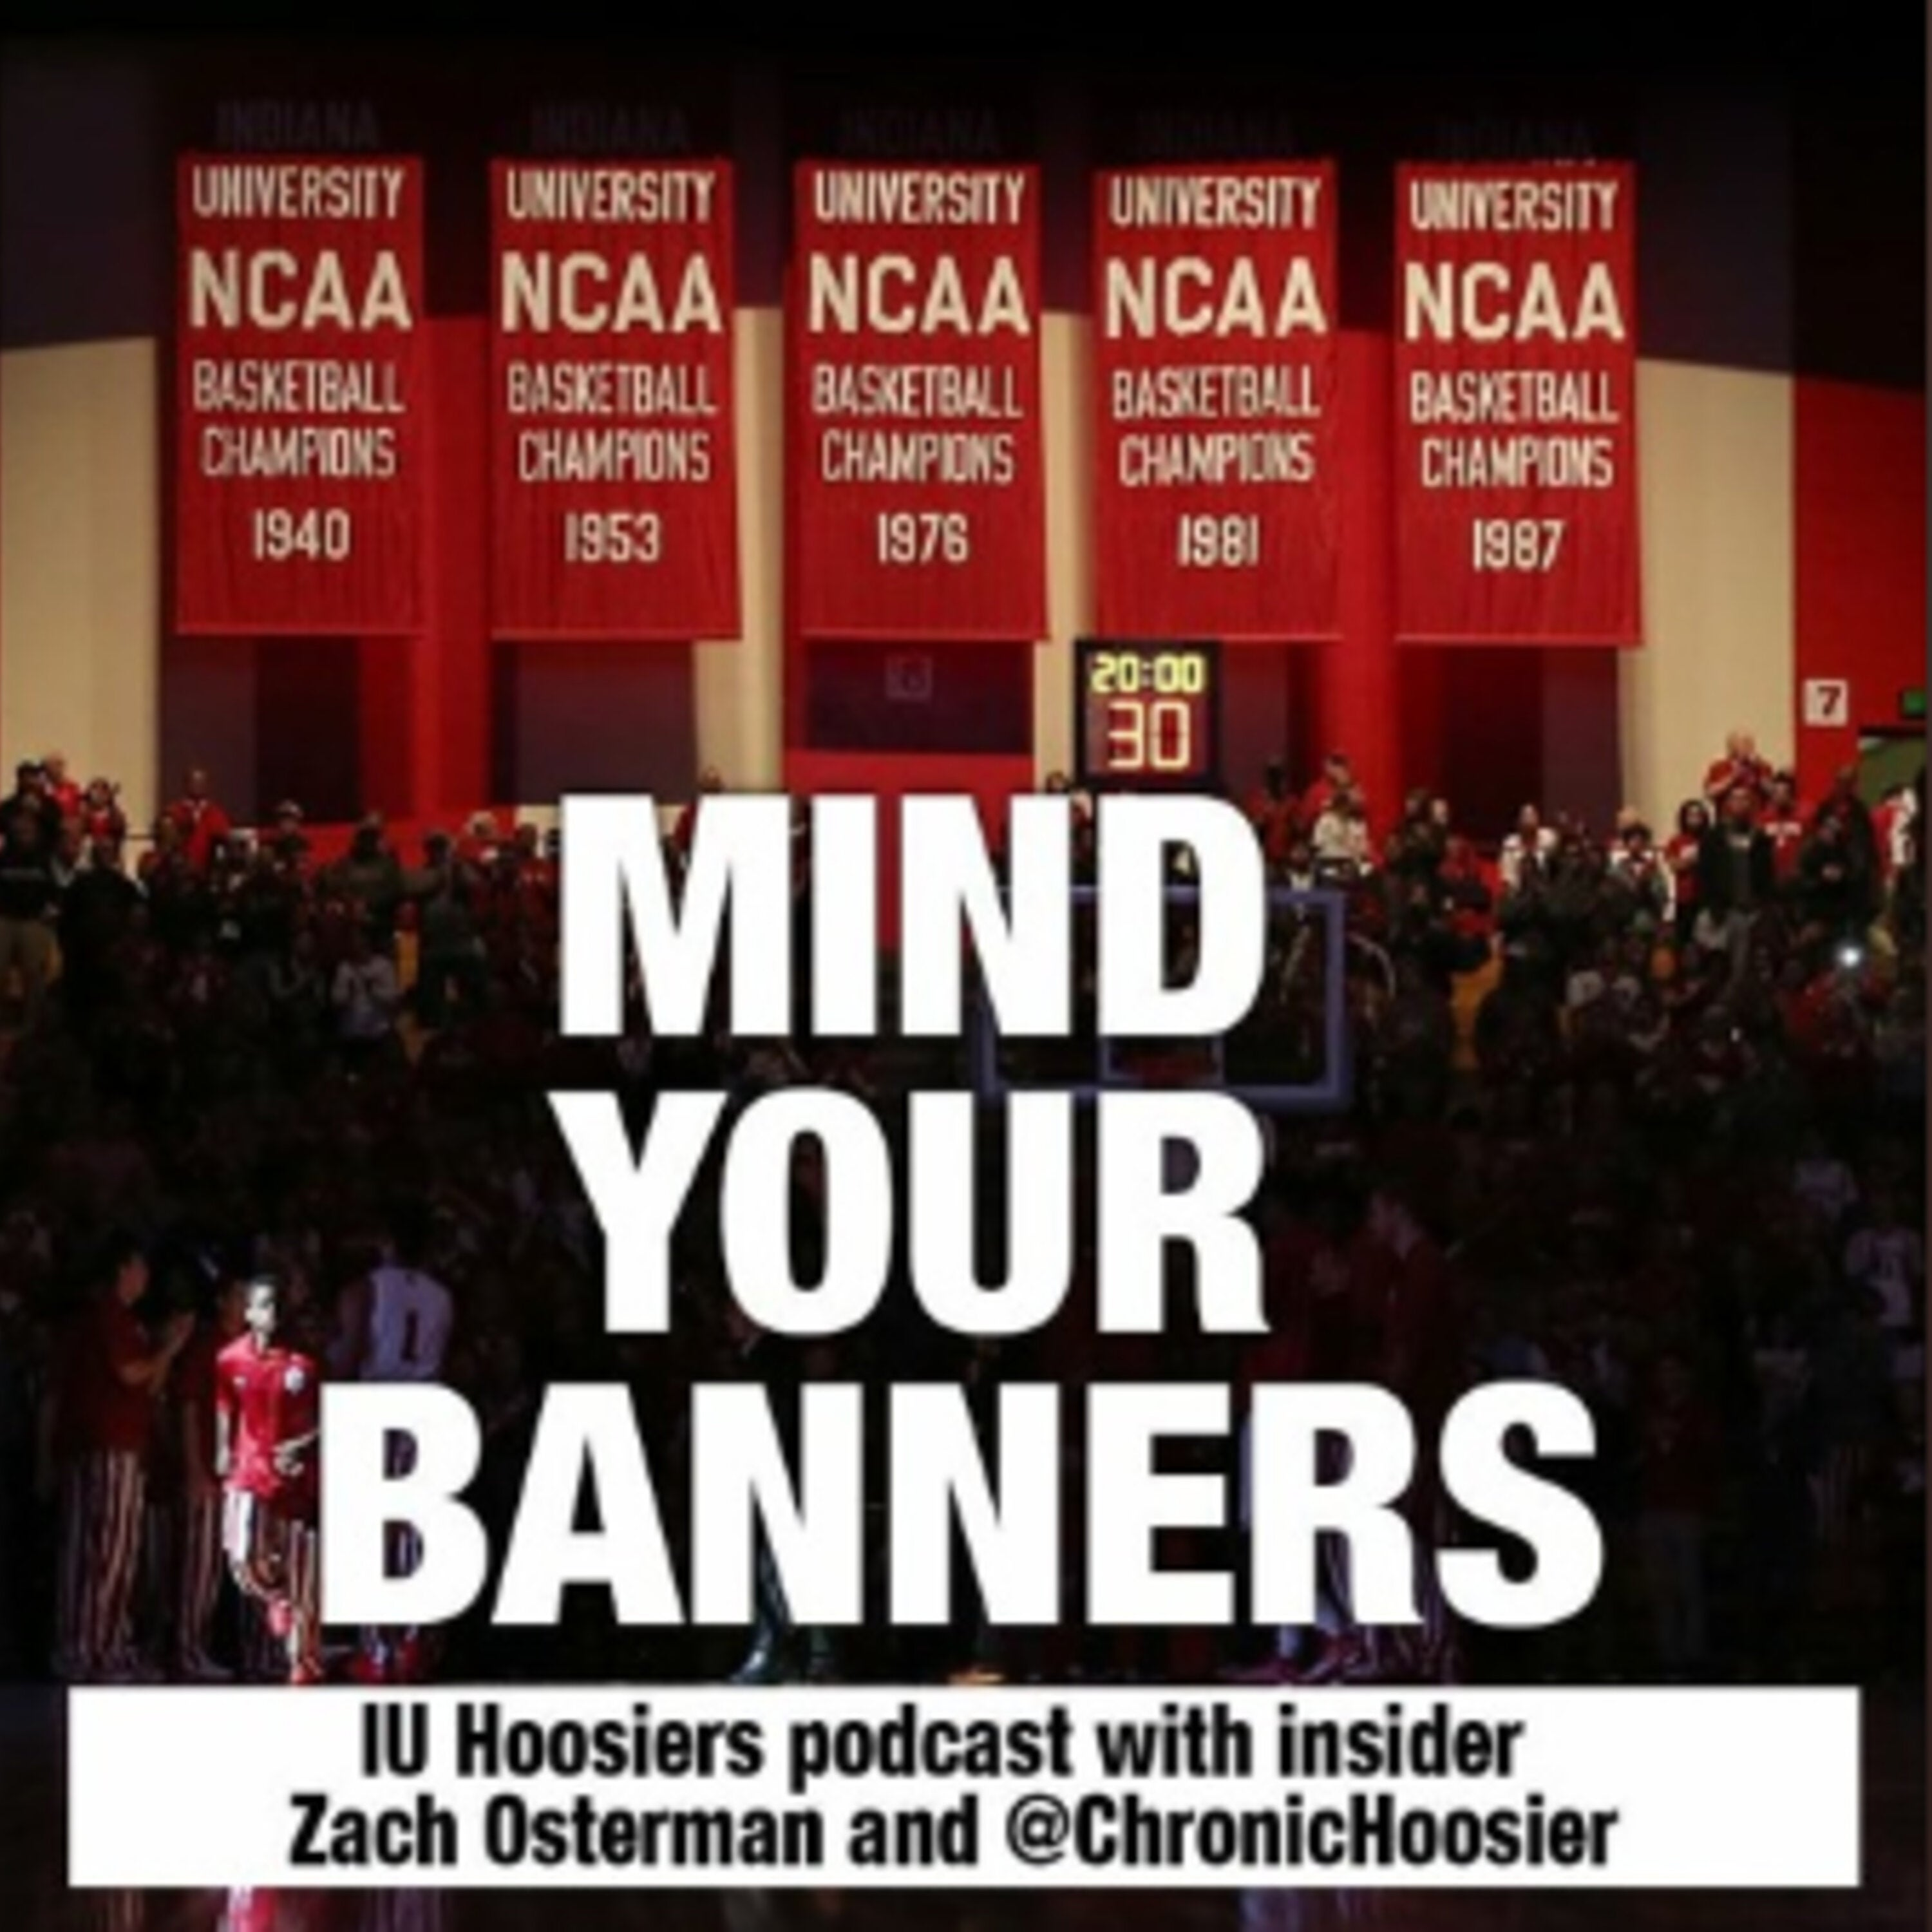 Mind Your Banners: Sizing up an important Indiana-Purdue game